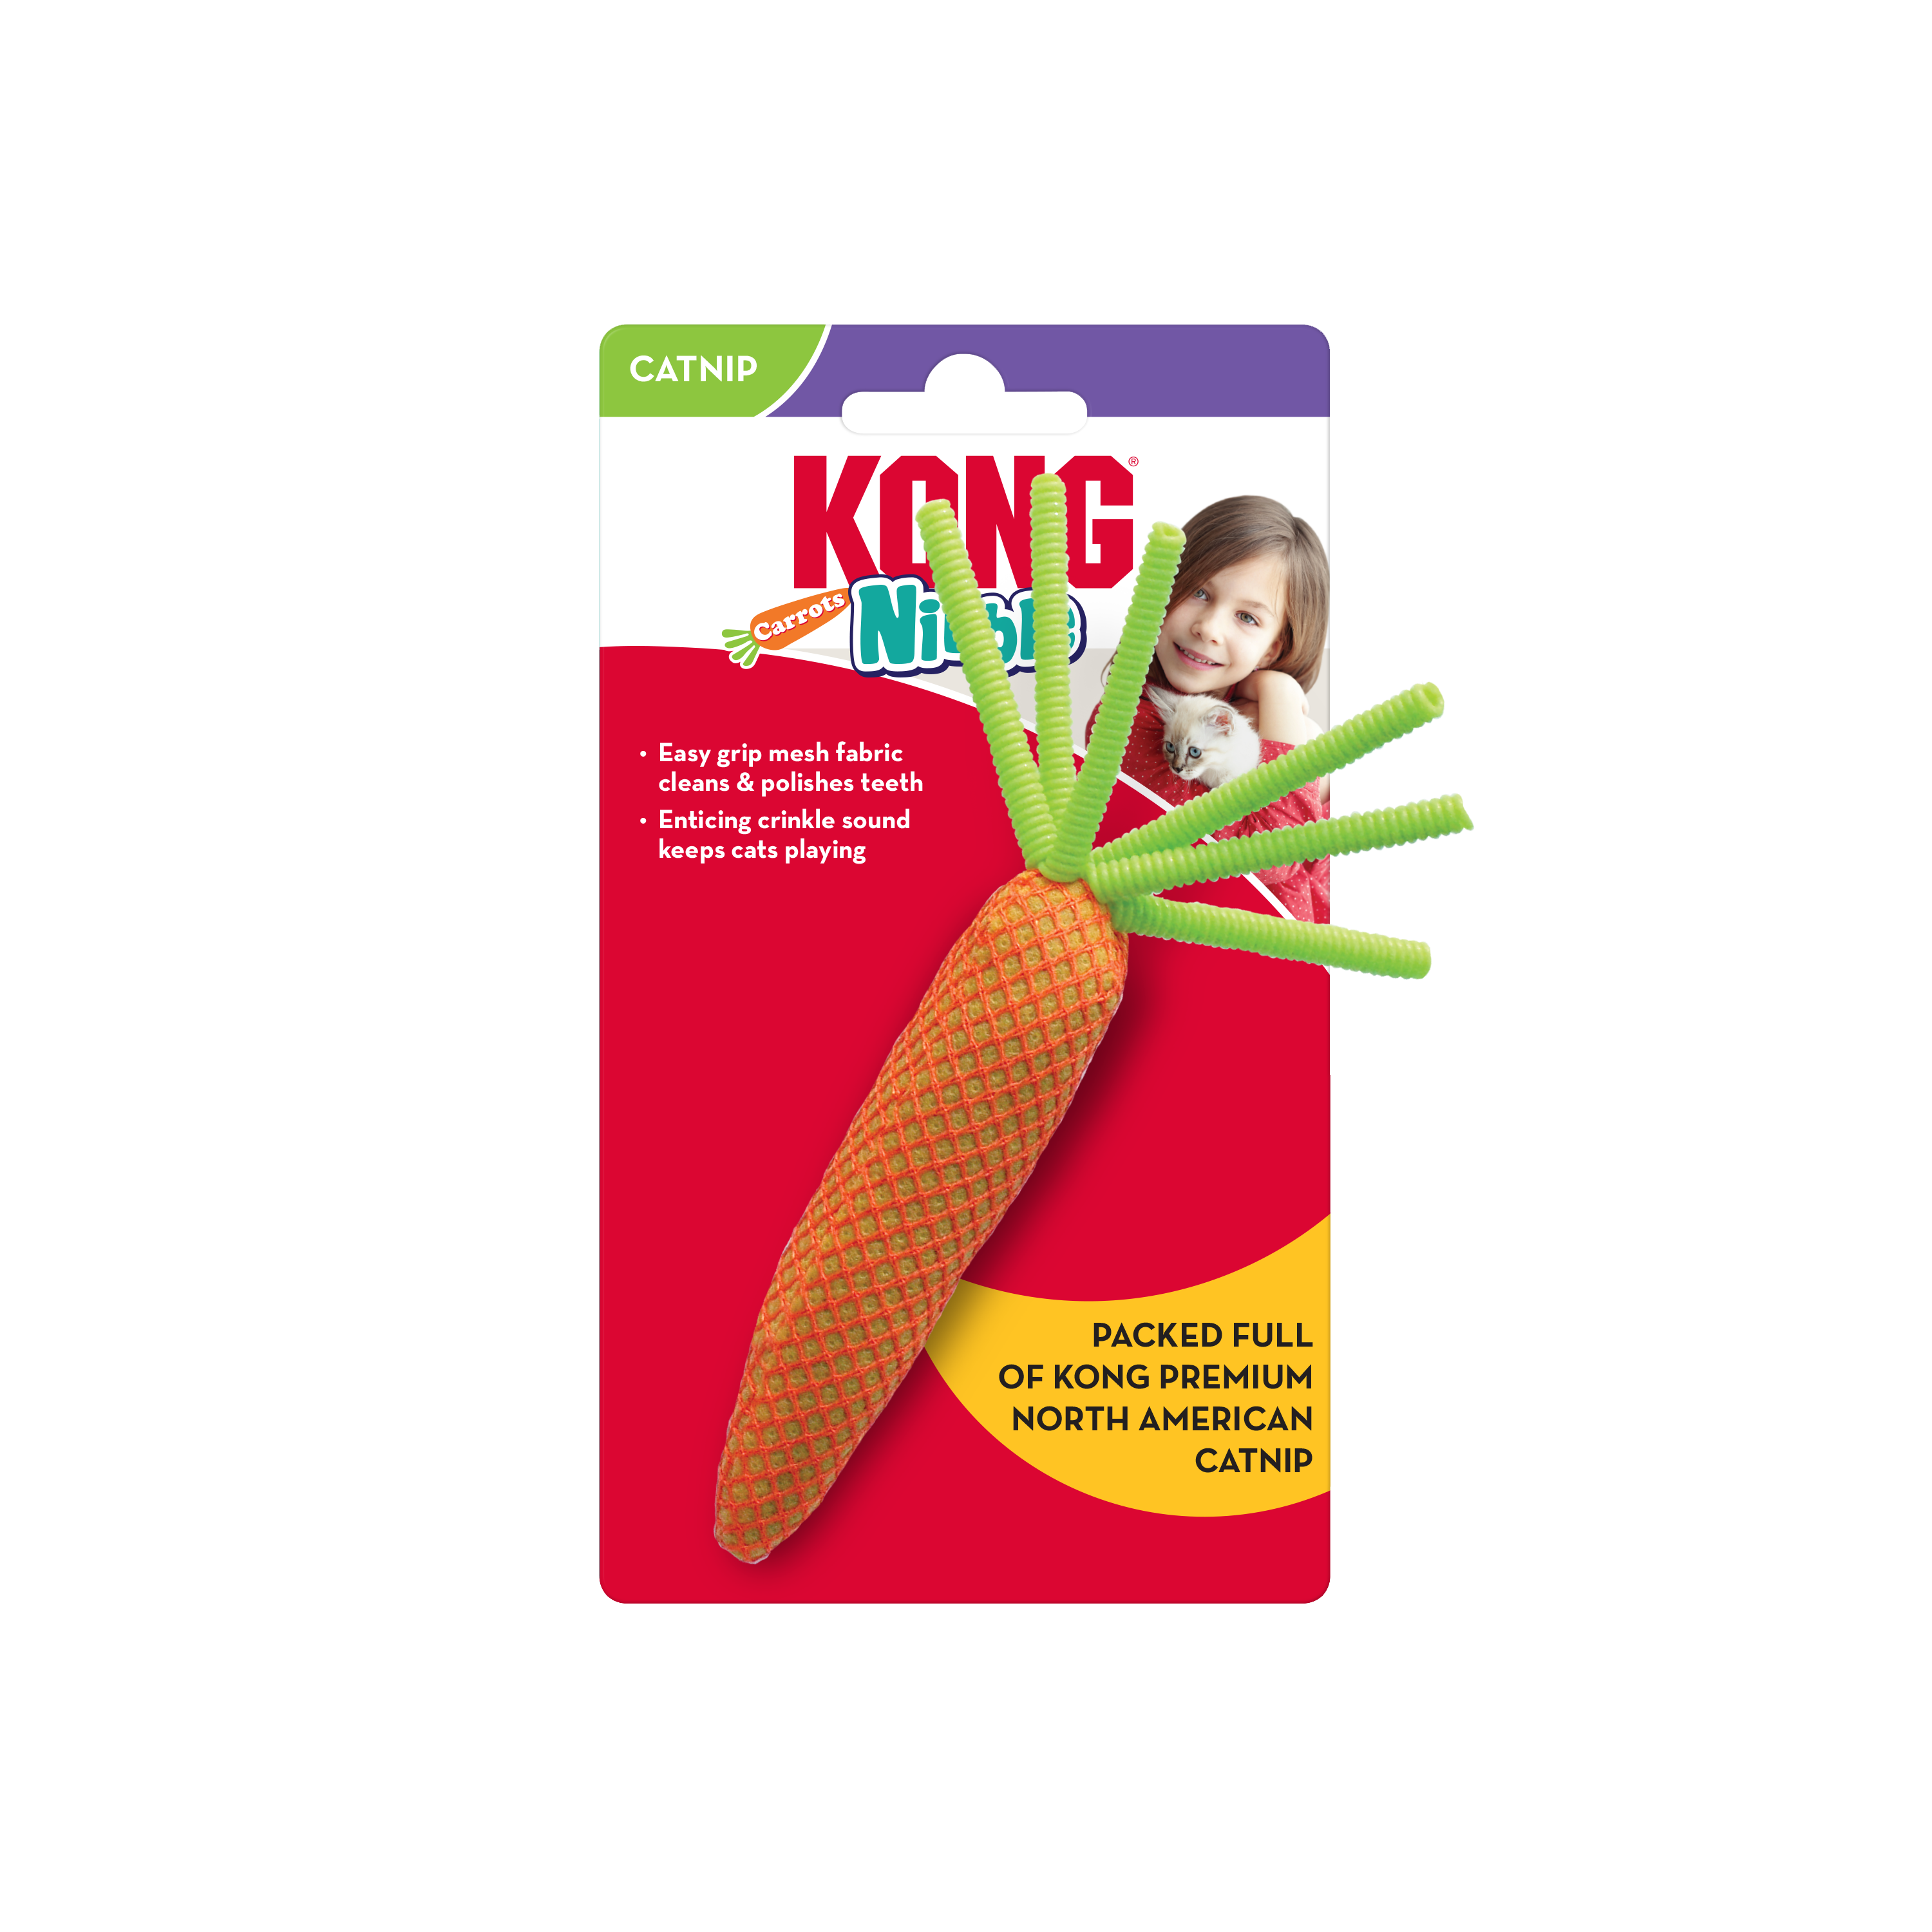 Nibble Carrots onpack product image